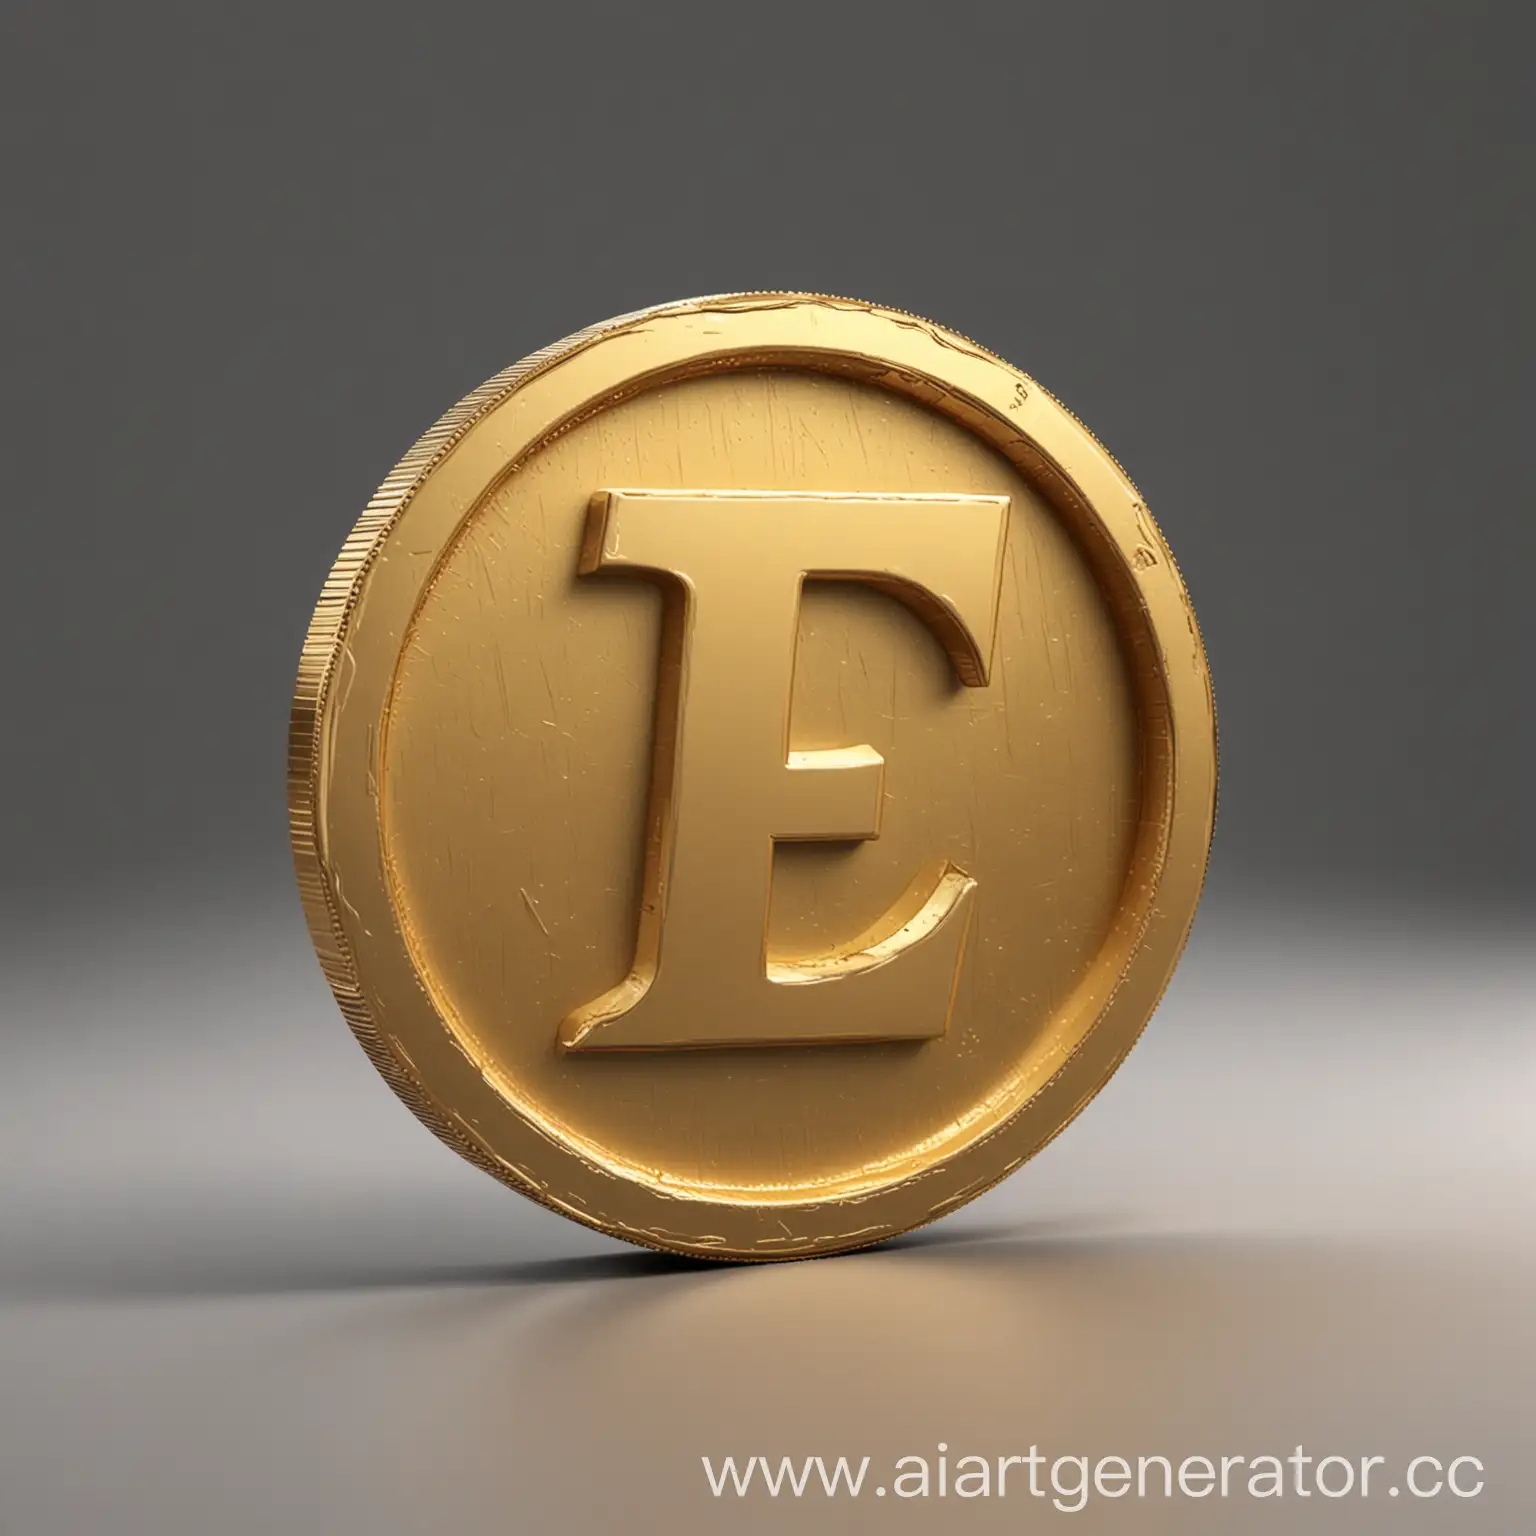 3D gold coin with the letter E in the center, without background